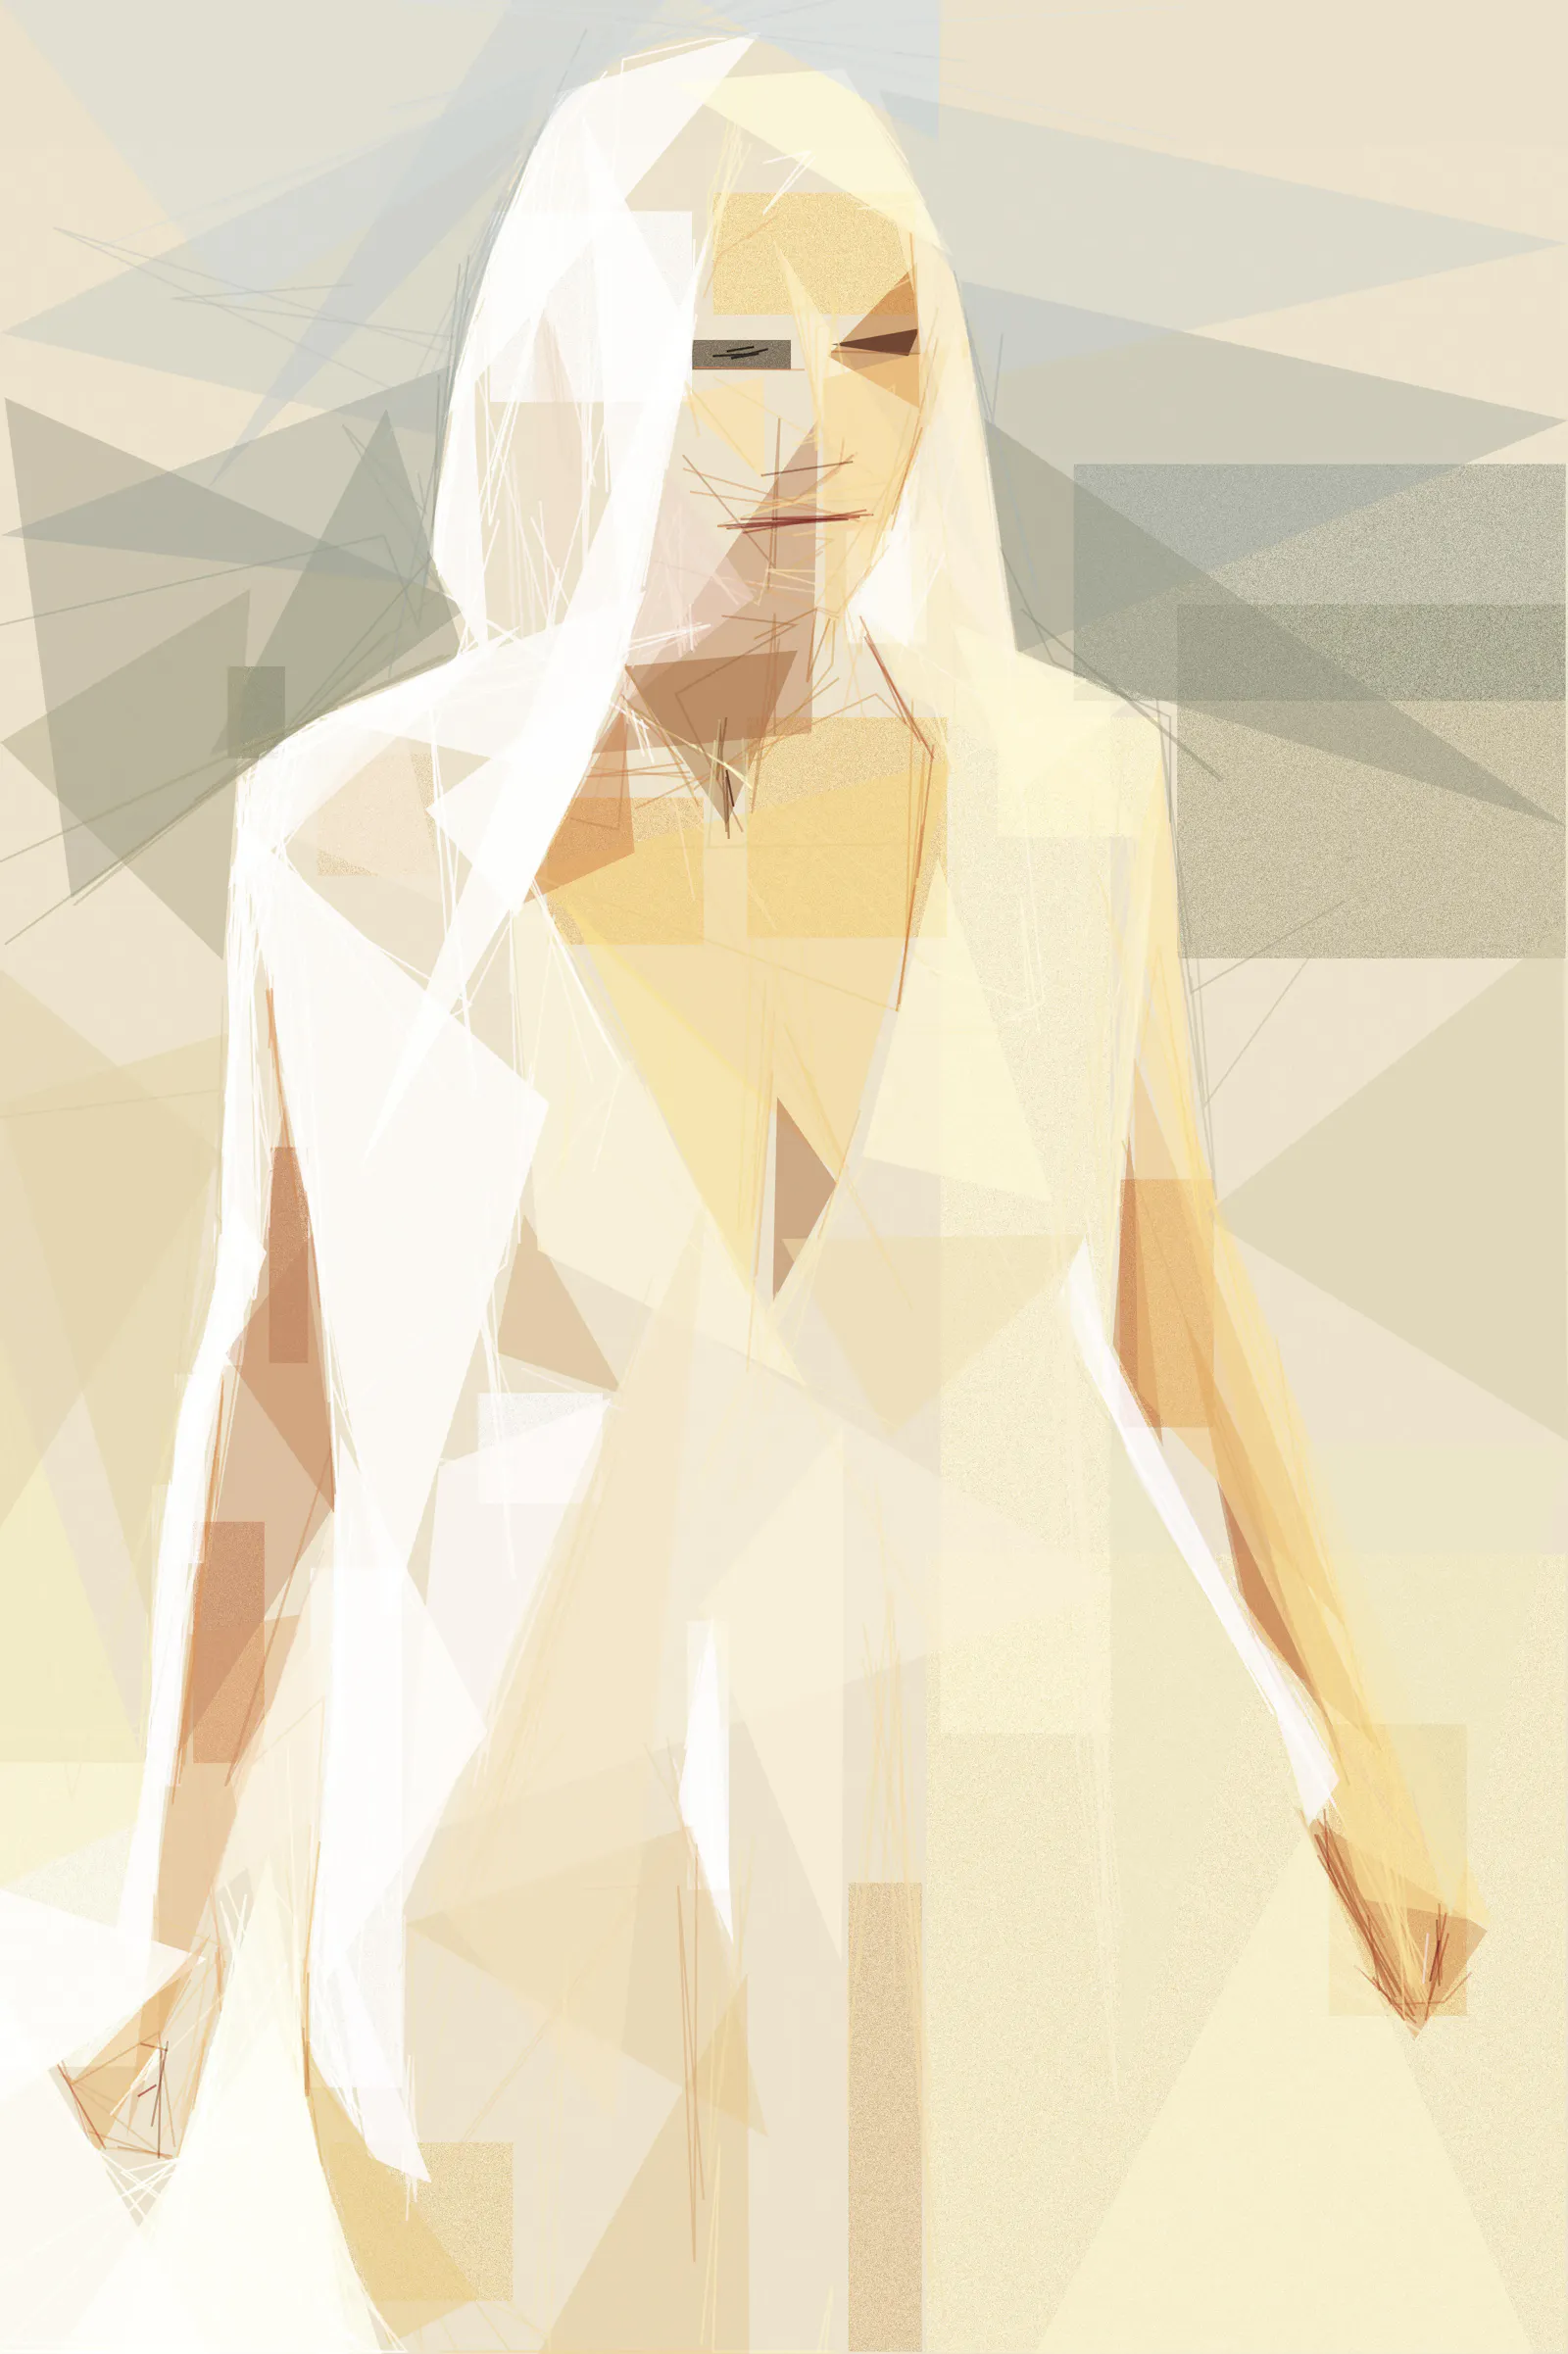 An impressionistic picture, constructed out of triangles, lines and squares, of a woman in a hooded robe